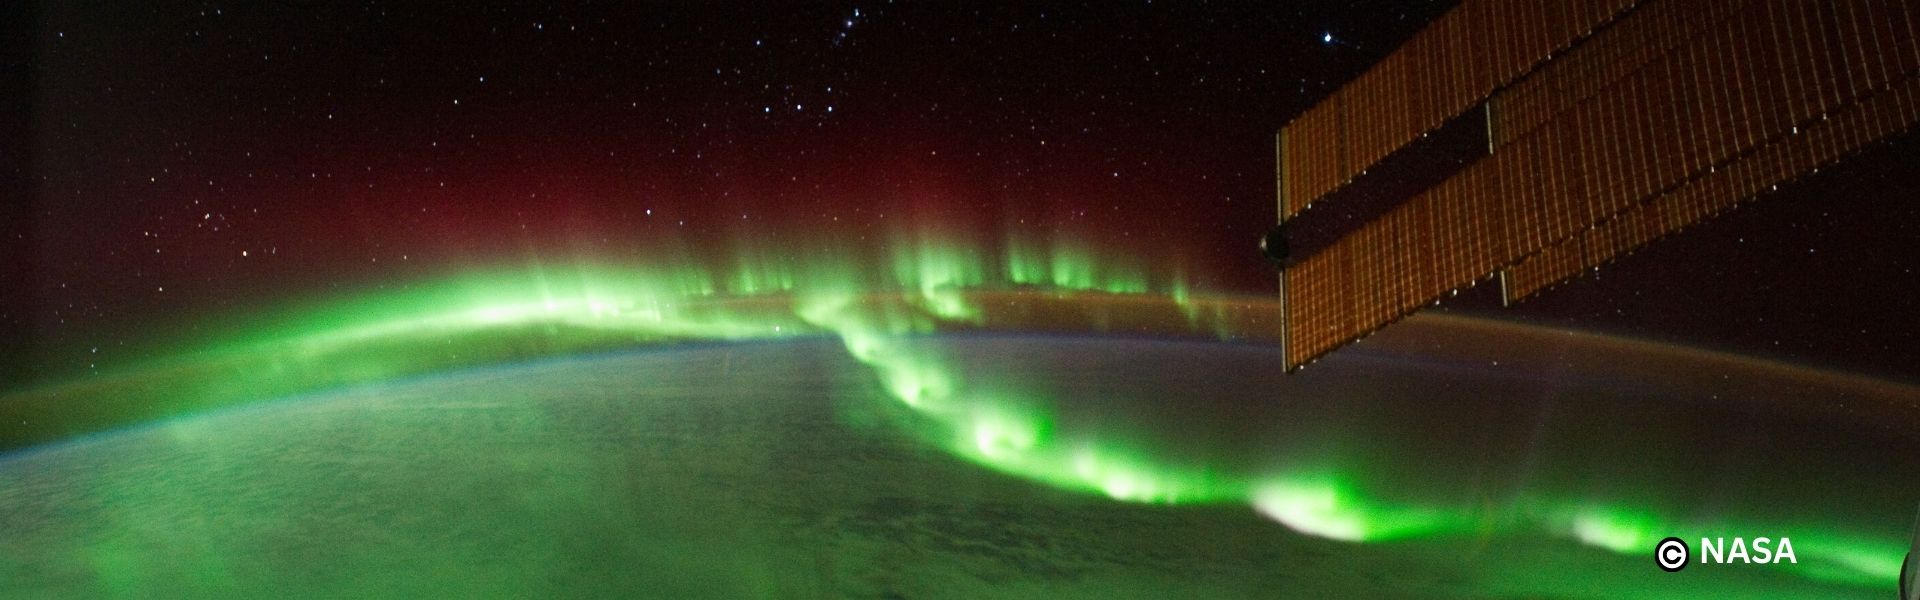 our planet from space with the northern lights shining green